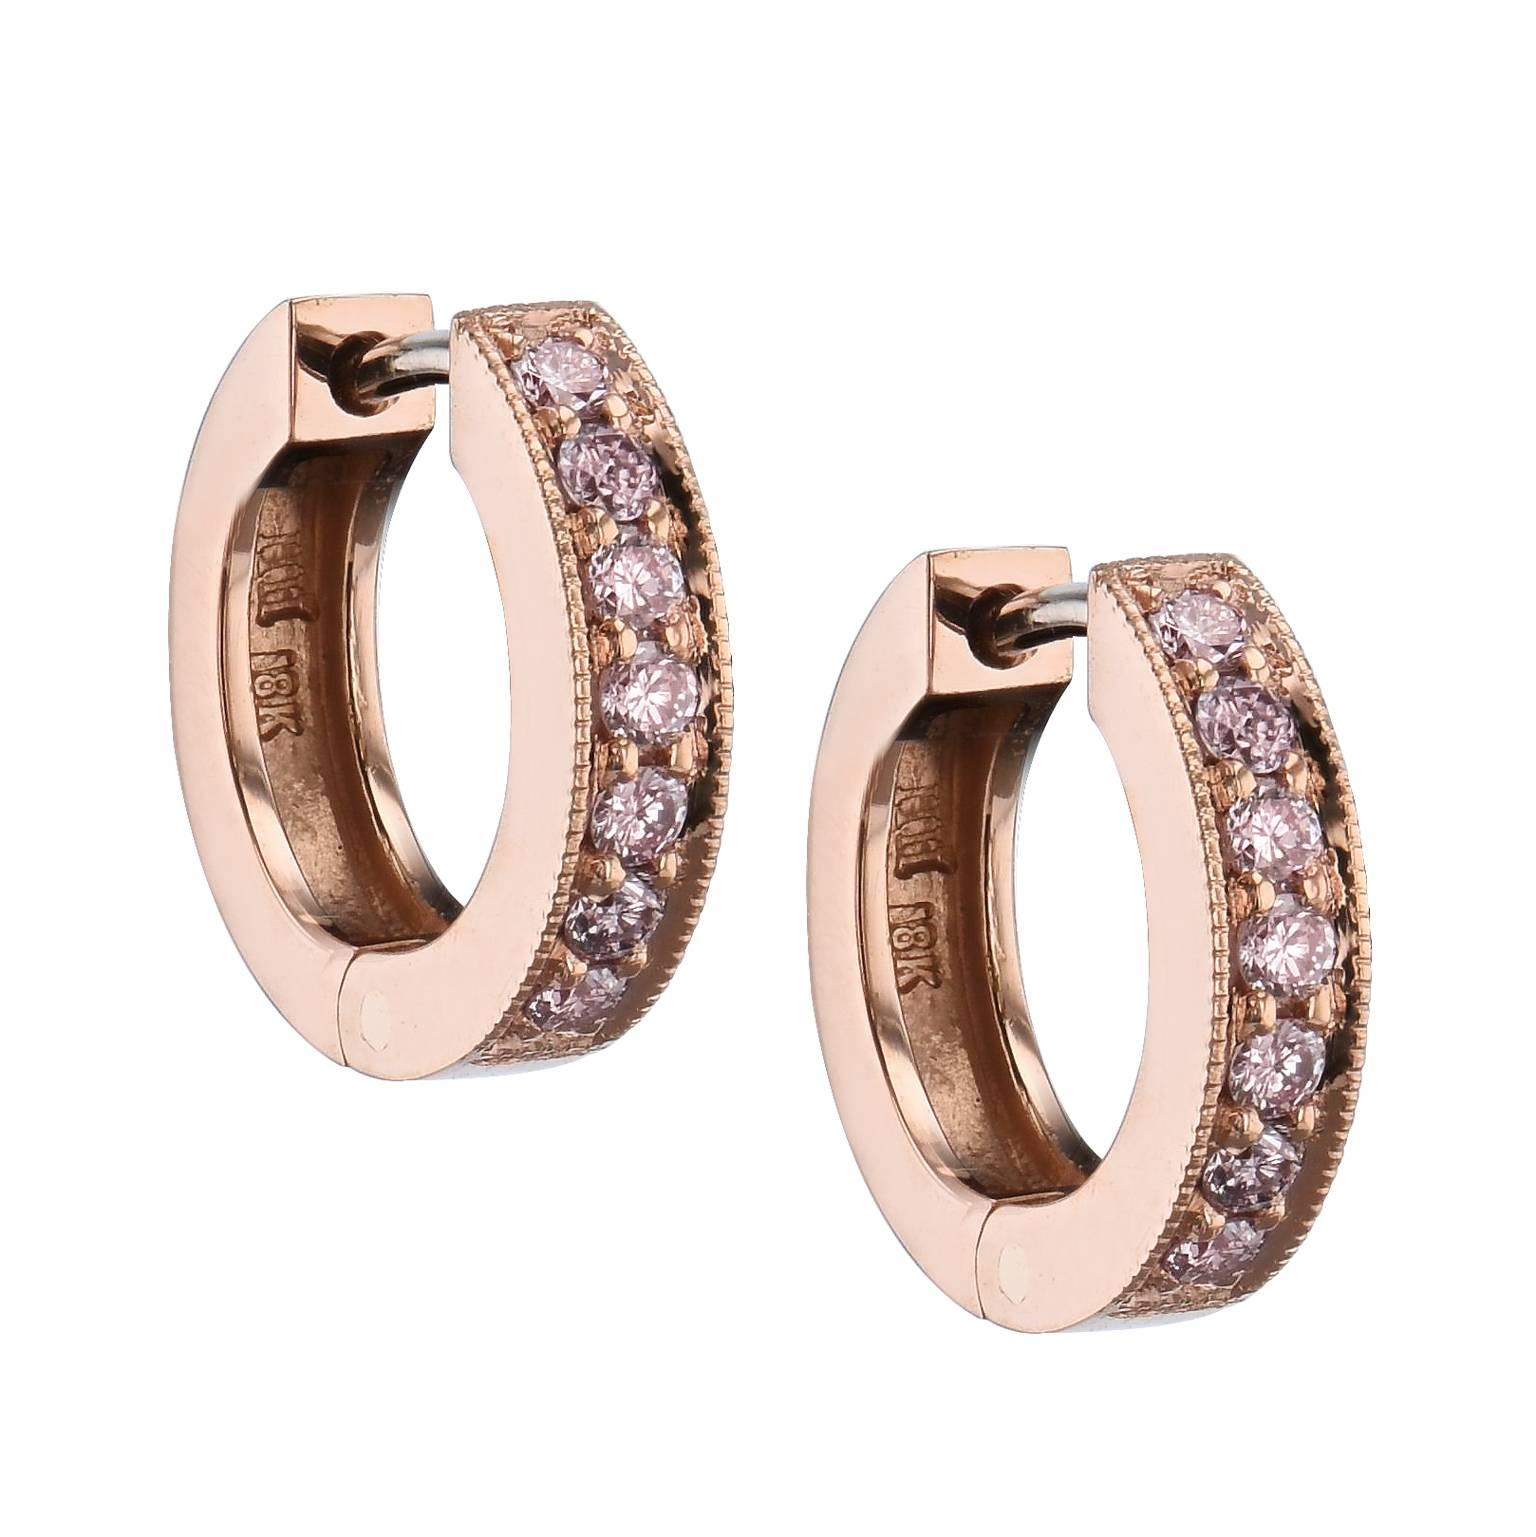 18 karat rose gold act as a backdrop to a beautiful sea of 0.29 carat of pink diamond pave set with milgrain work (SI1/SI2) in these handmade H and H classic hinged hoop earrings.